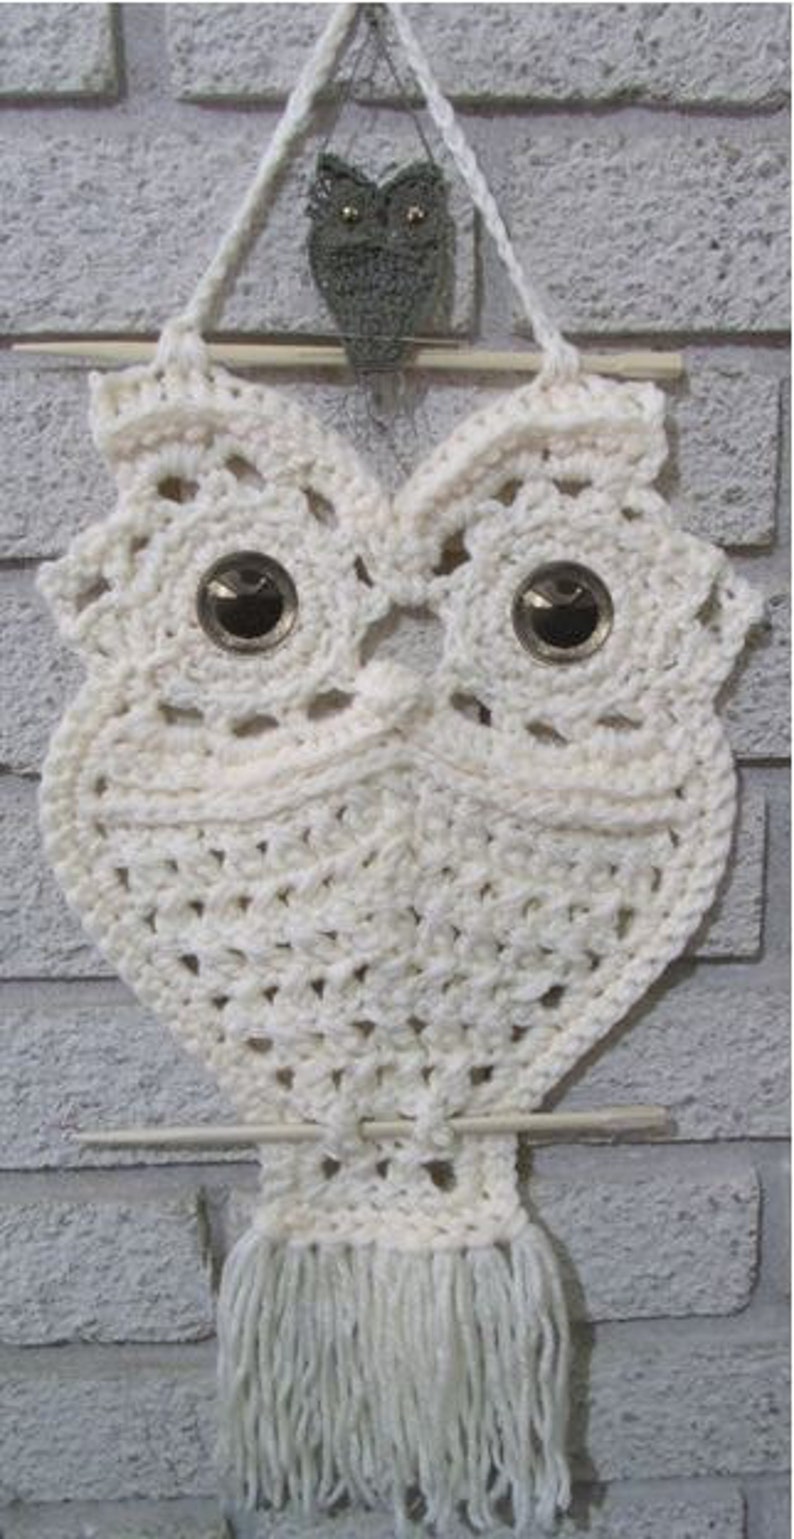 Crochet Owl Hanger in Macrame Style INSTANT DOWNLOAD PDF from Thomasina Cummings Designs image 1